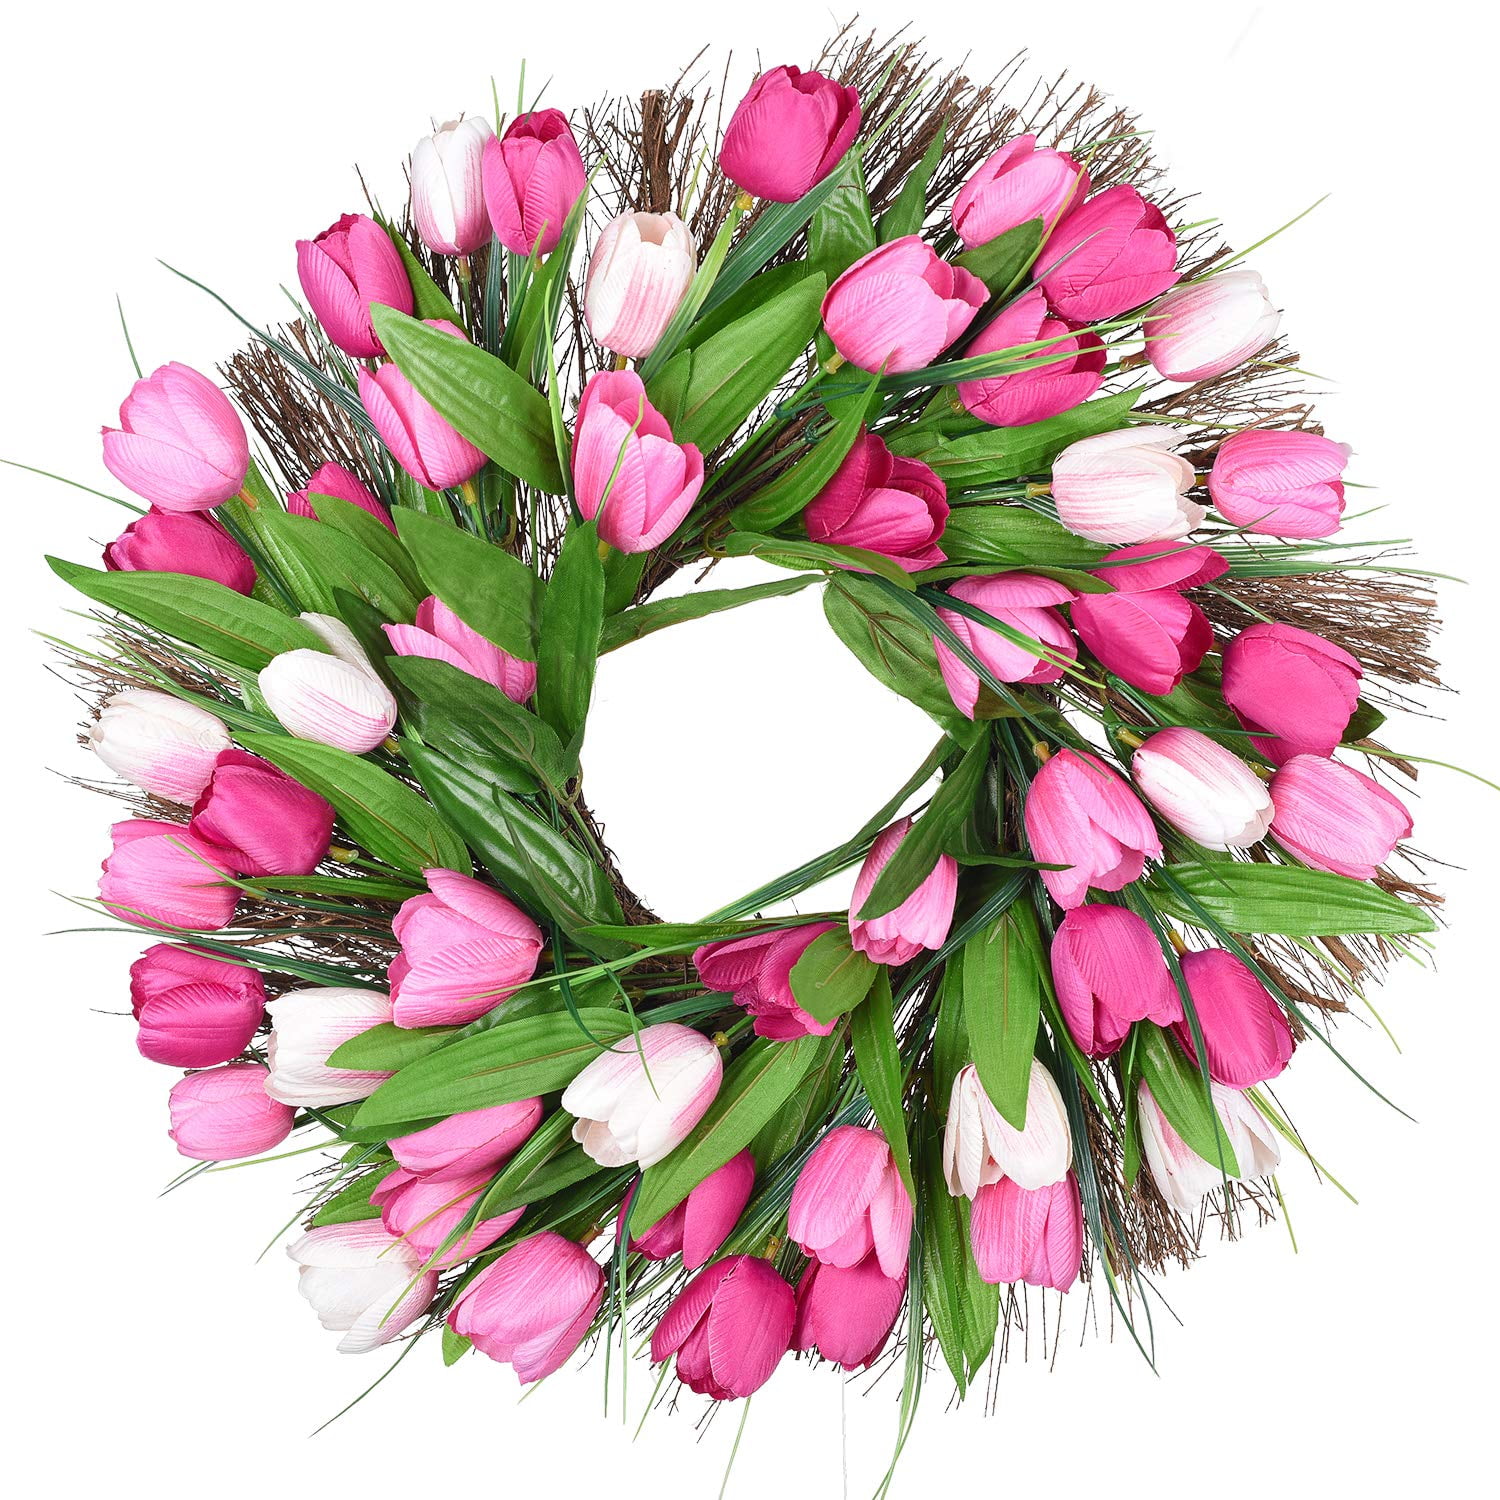 ACJRYO 18 Inch Artificial Tulip Wreath for Front Door Fake Spring Silk Flower Wreath with Green Leaves Silk Tulip Flower Wreaths for Home Wall Wedding Office Party Fistival Welcome Decor 